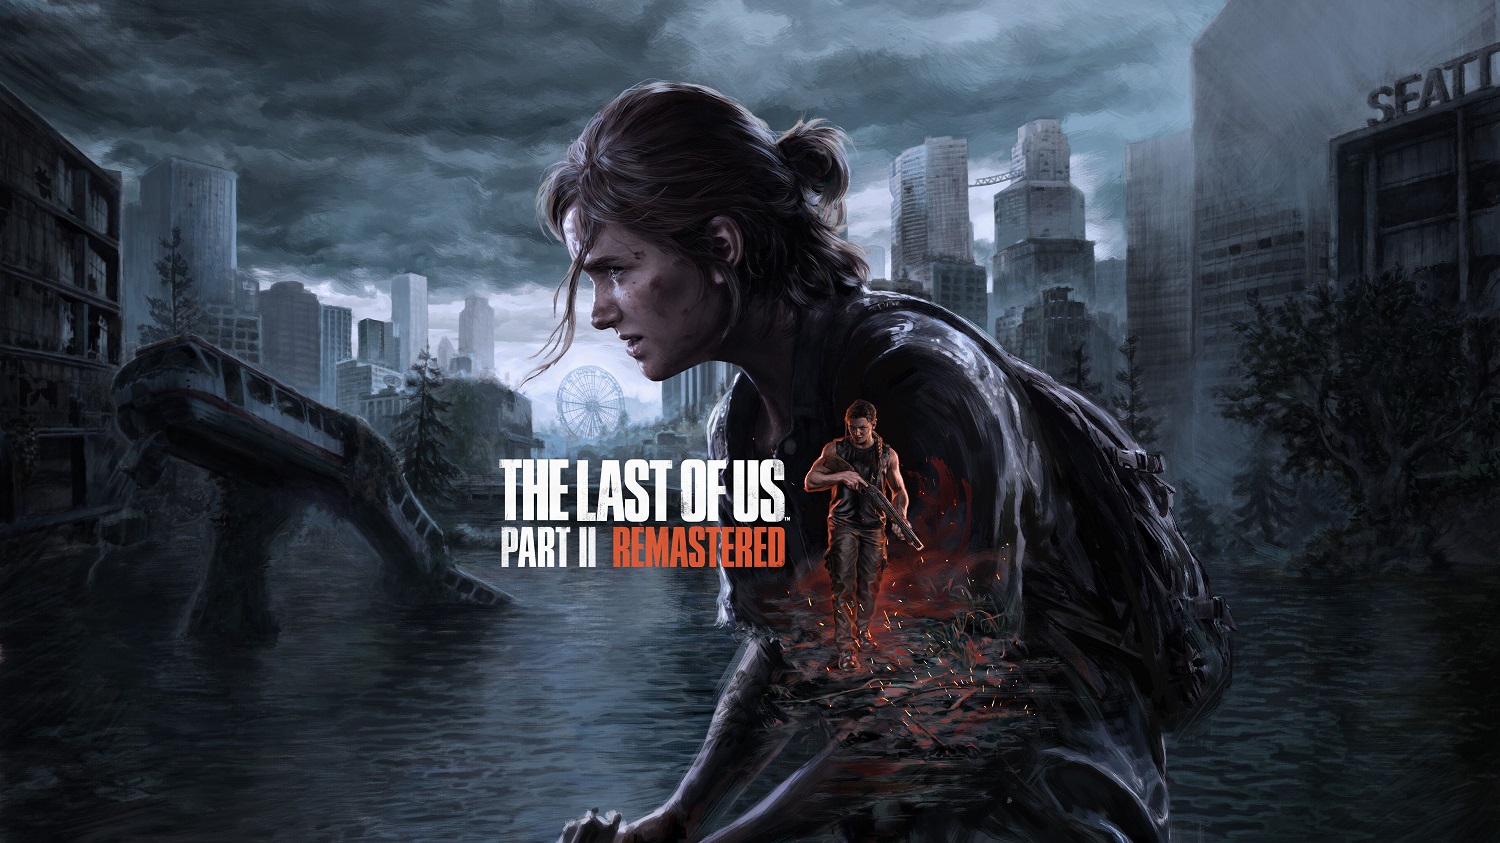 The Last of Us Part II Remastered画像